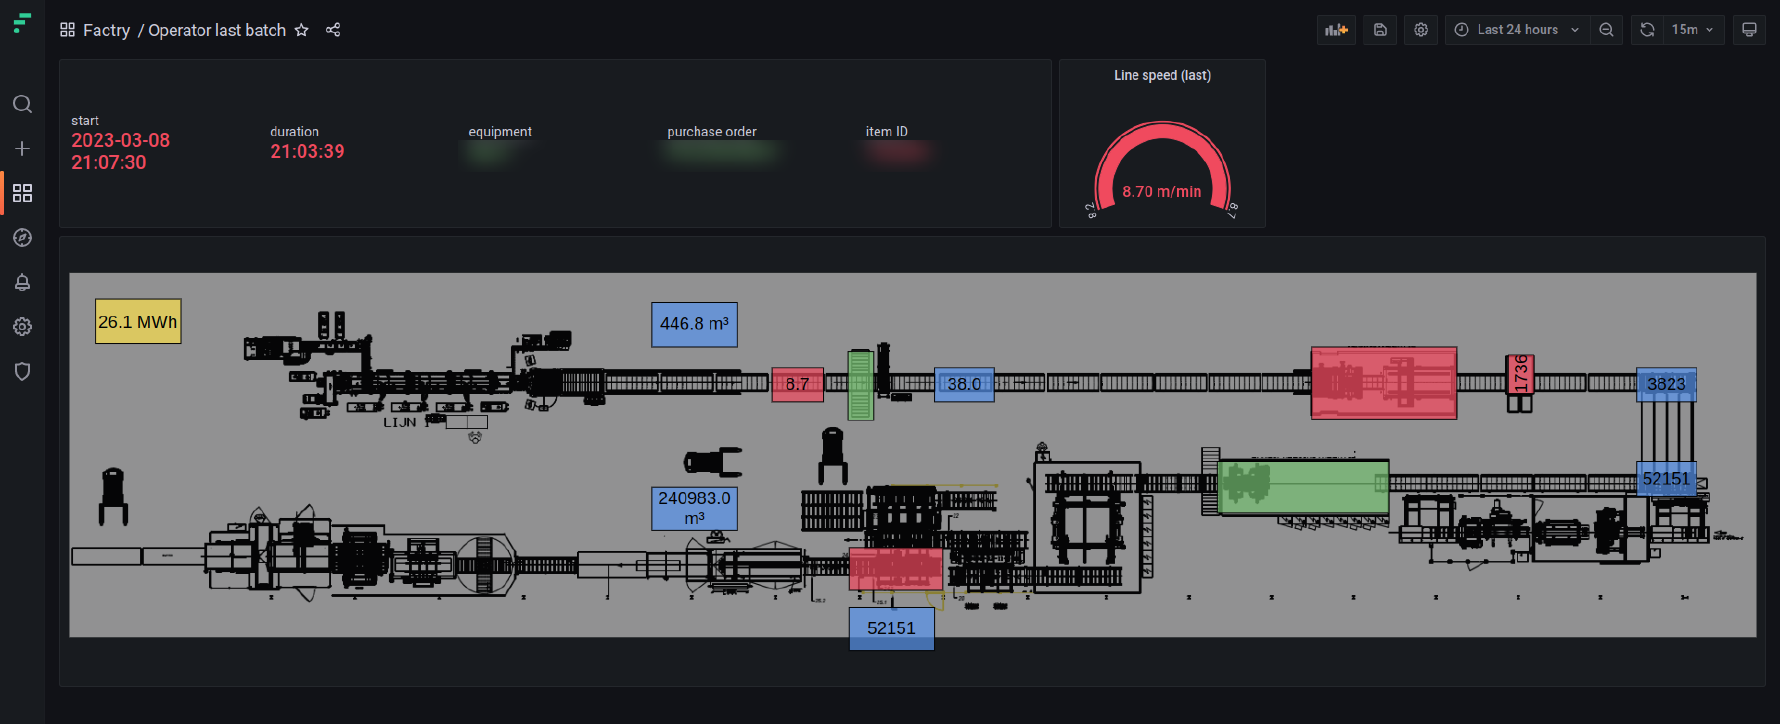 simplified operator experience dashboard